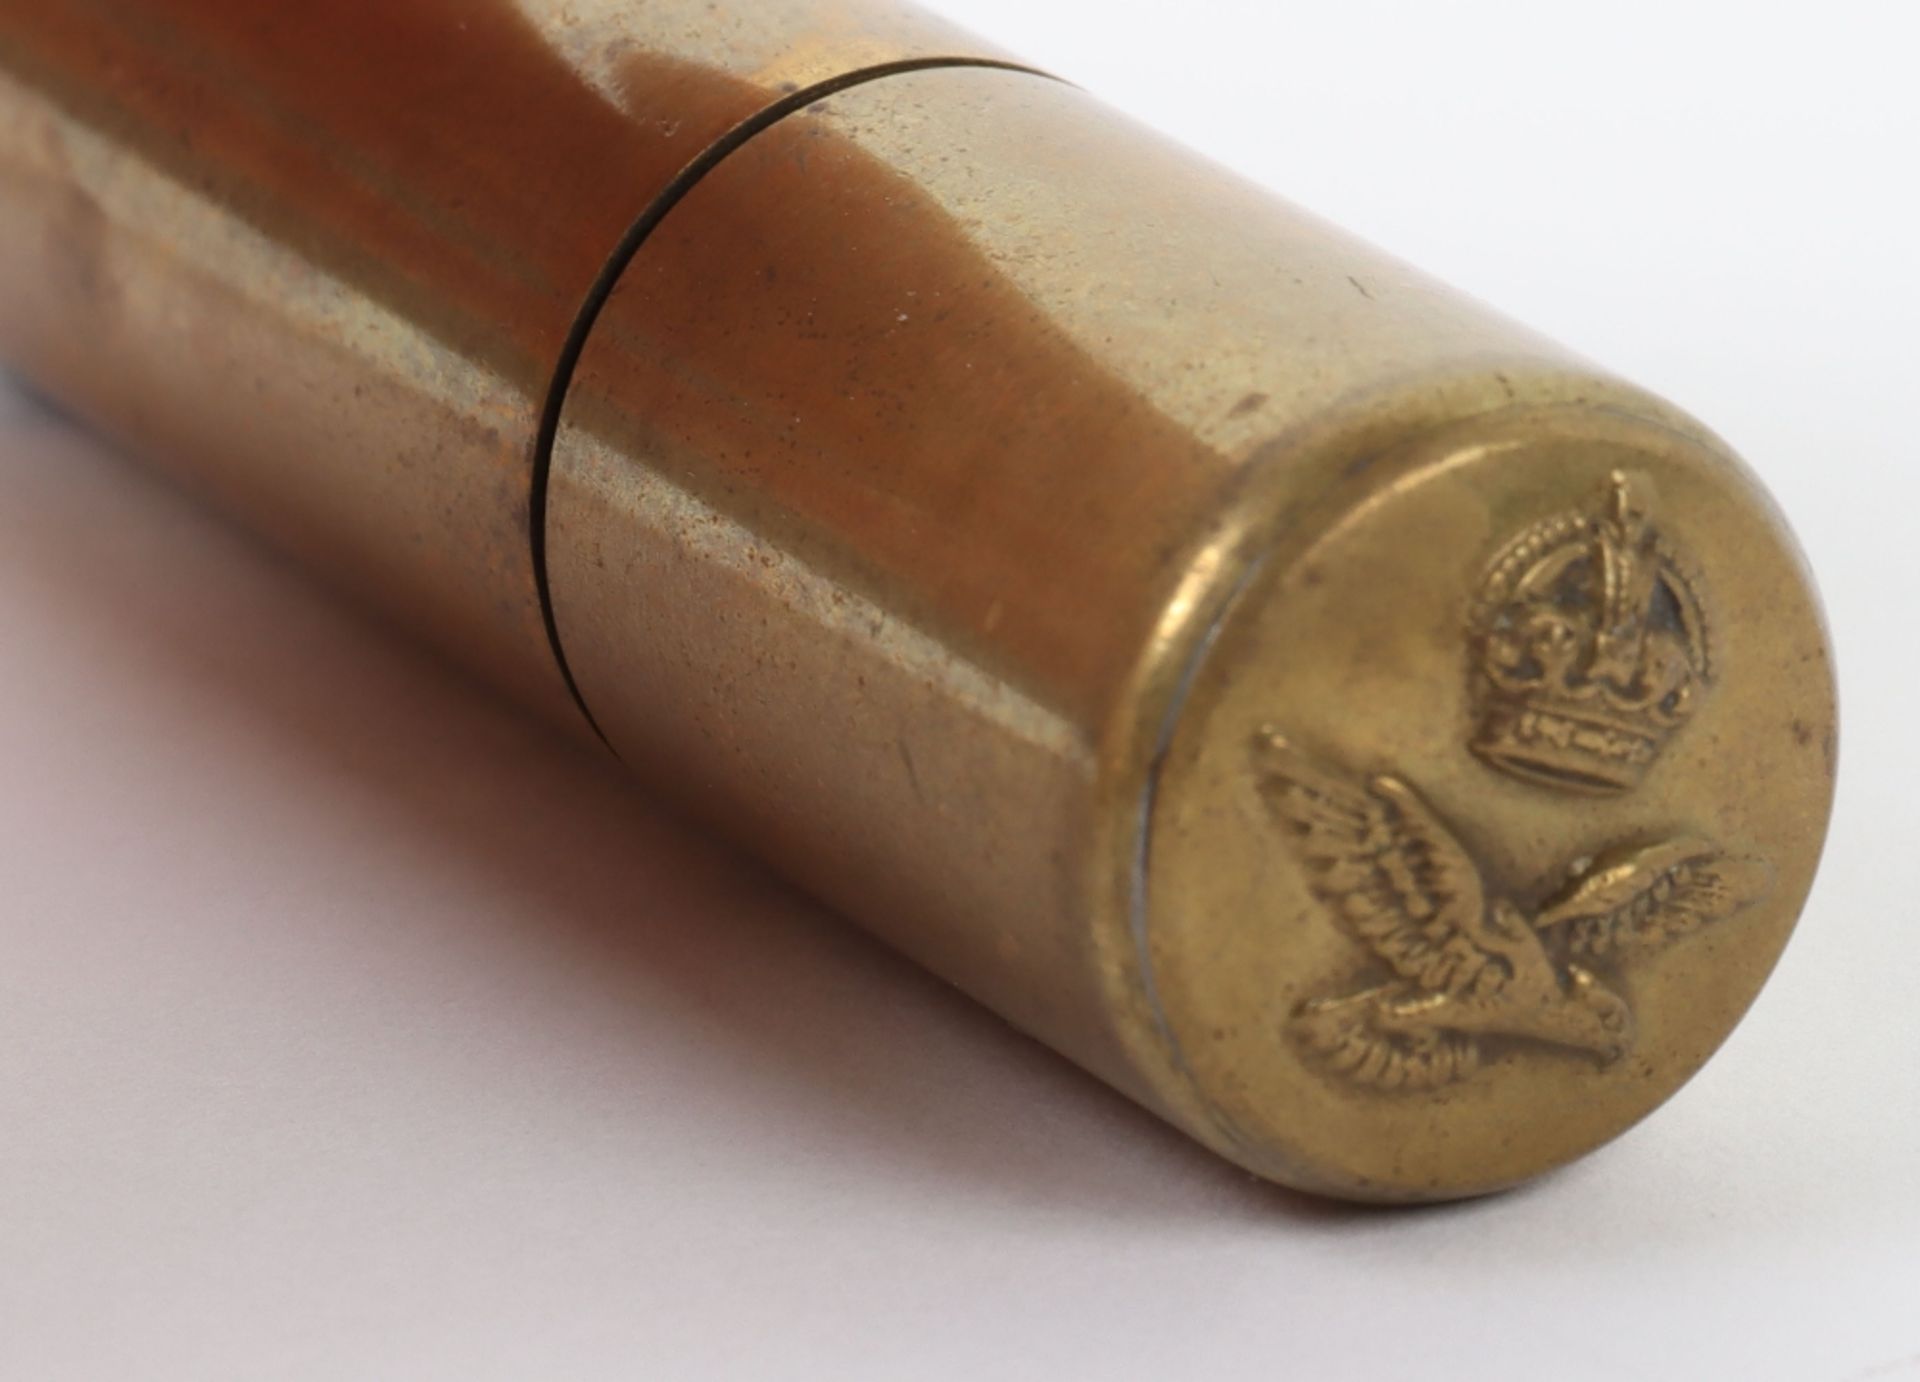 WW2 Royal Air Force Escape & Evasion Lighter with Concealed Compass - Image 4 of 5